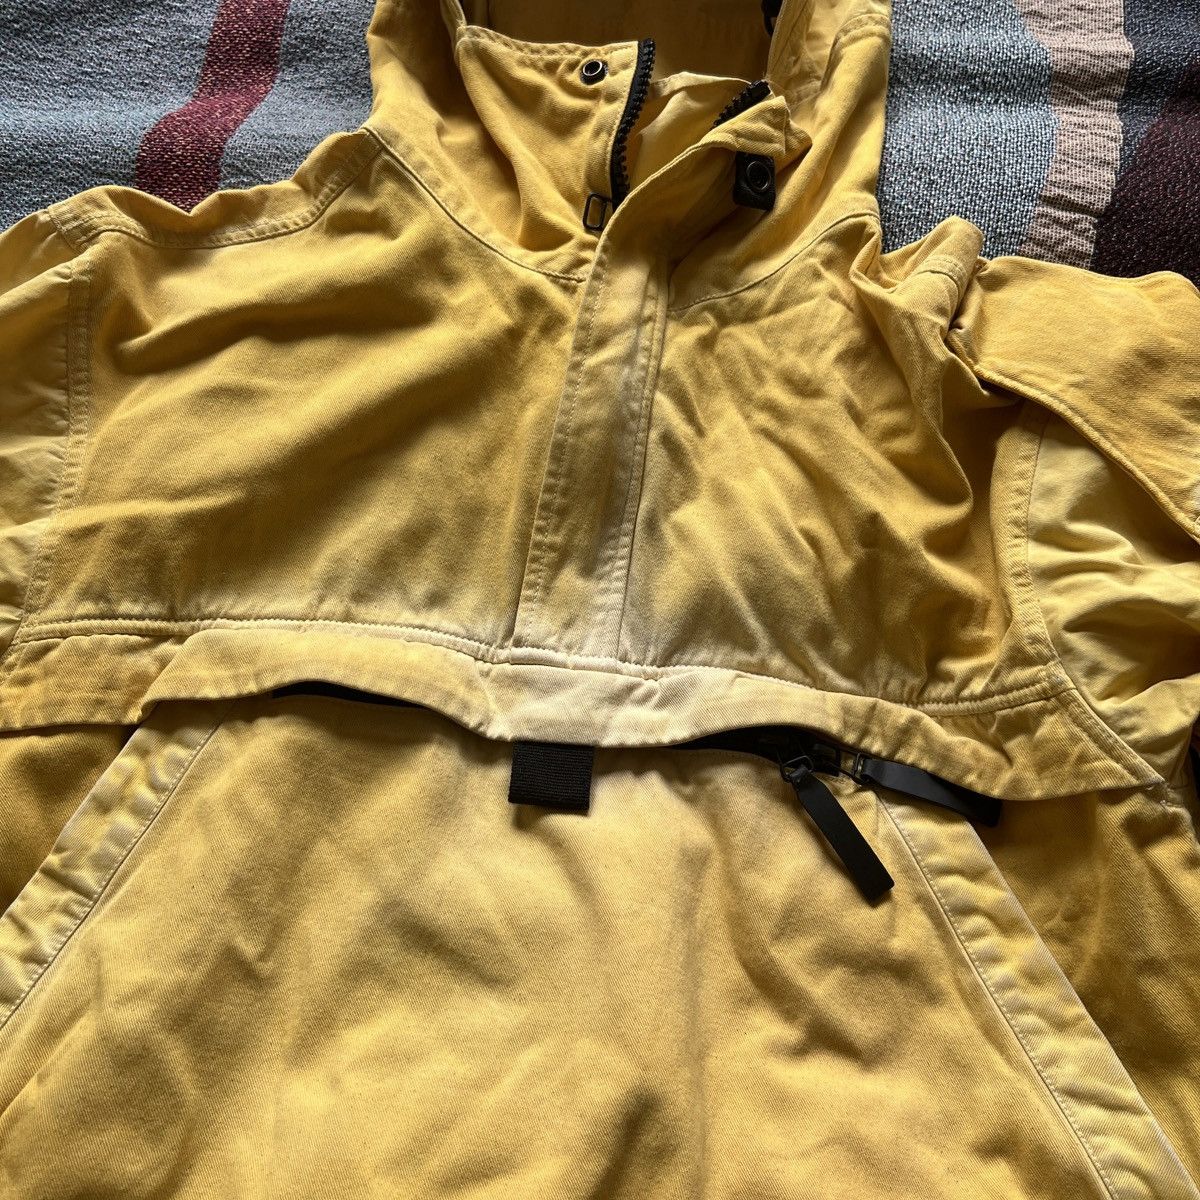 G Star Raw Rackam Anorak Raw Research collab | Grailed